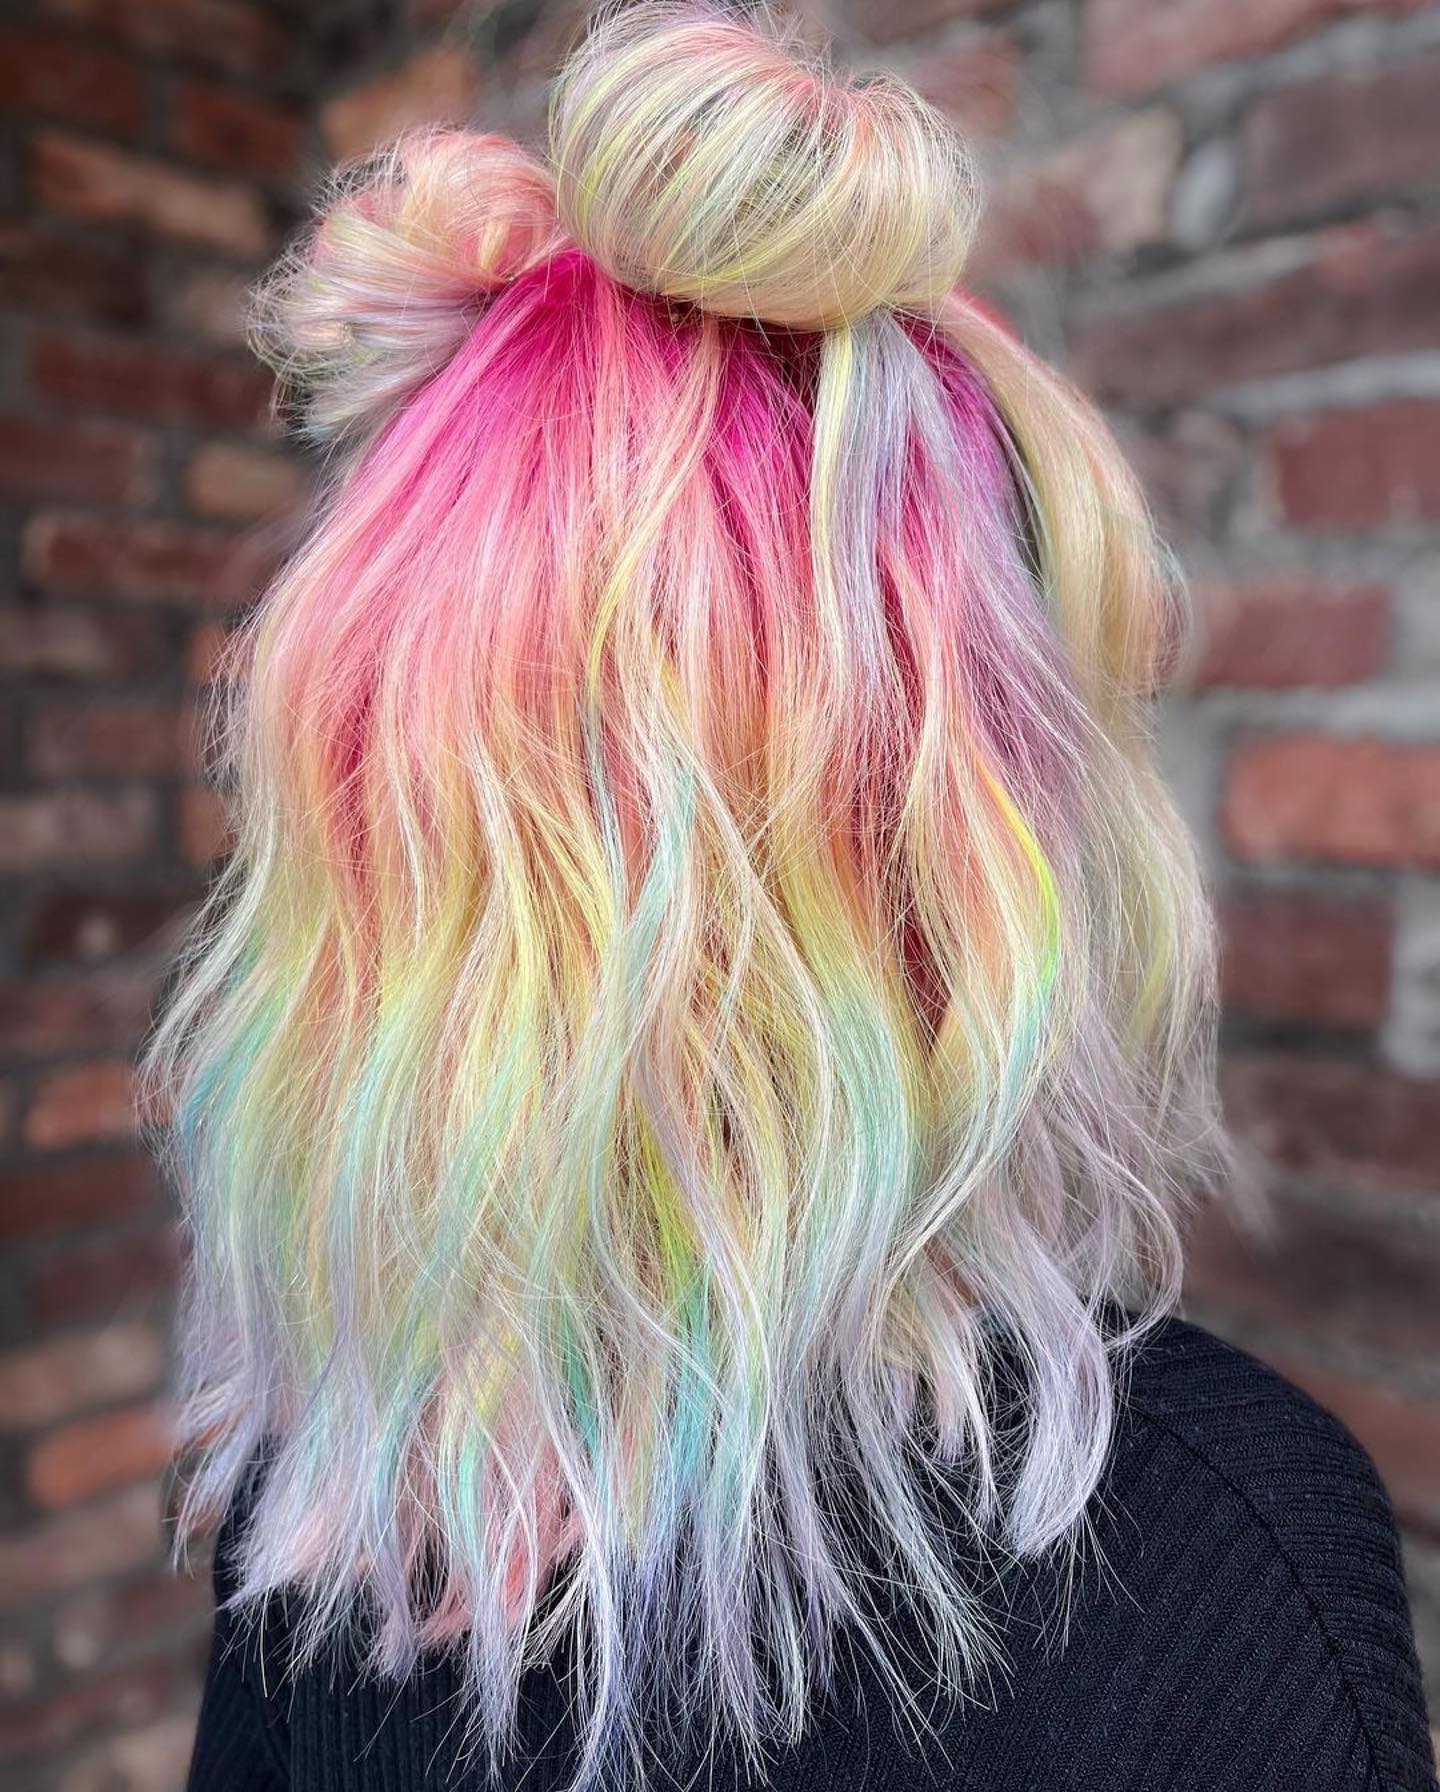 100+ Best Colorful Hair Ideas images 43